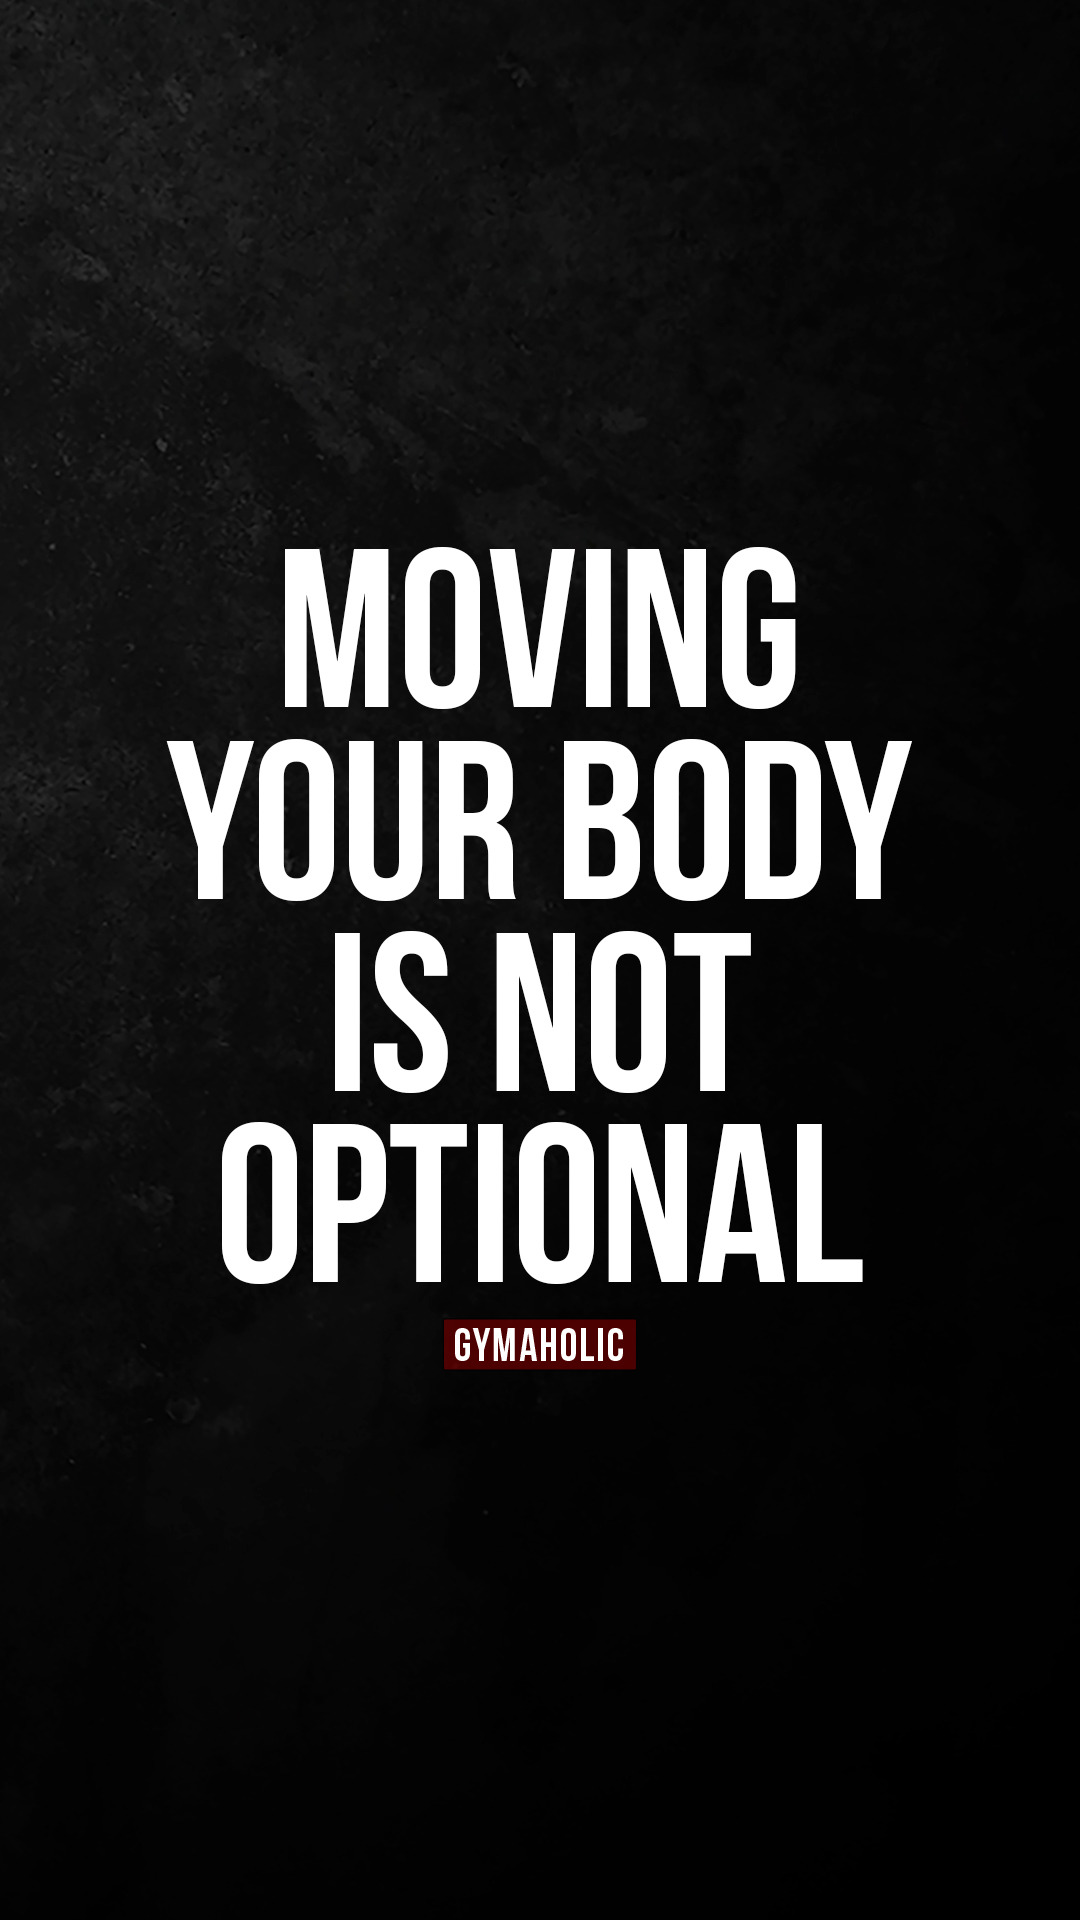 Moving your body is not optional